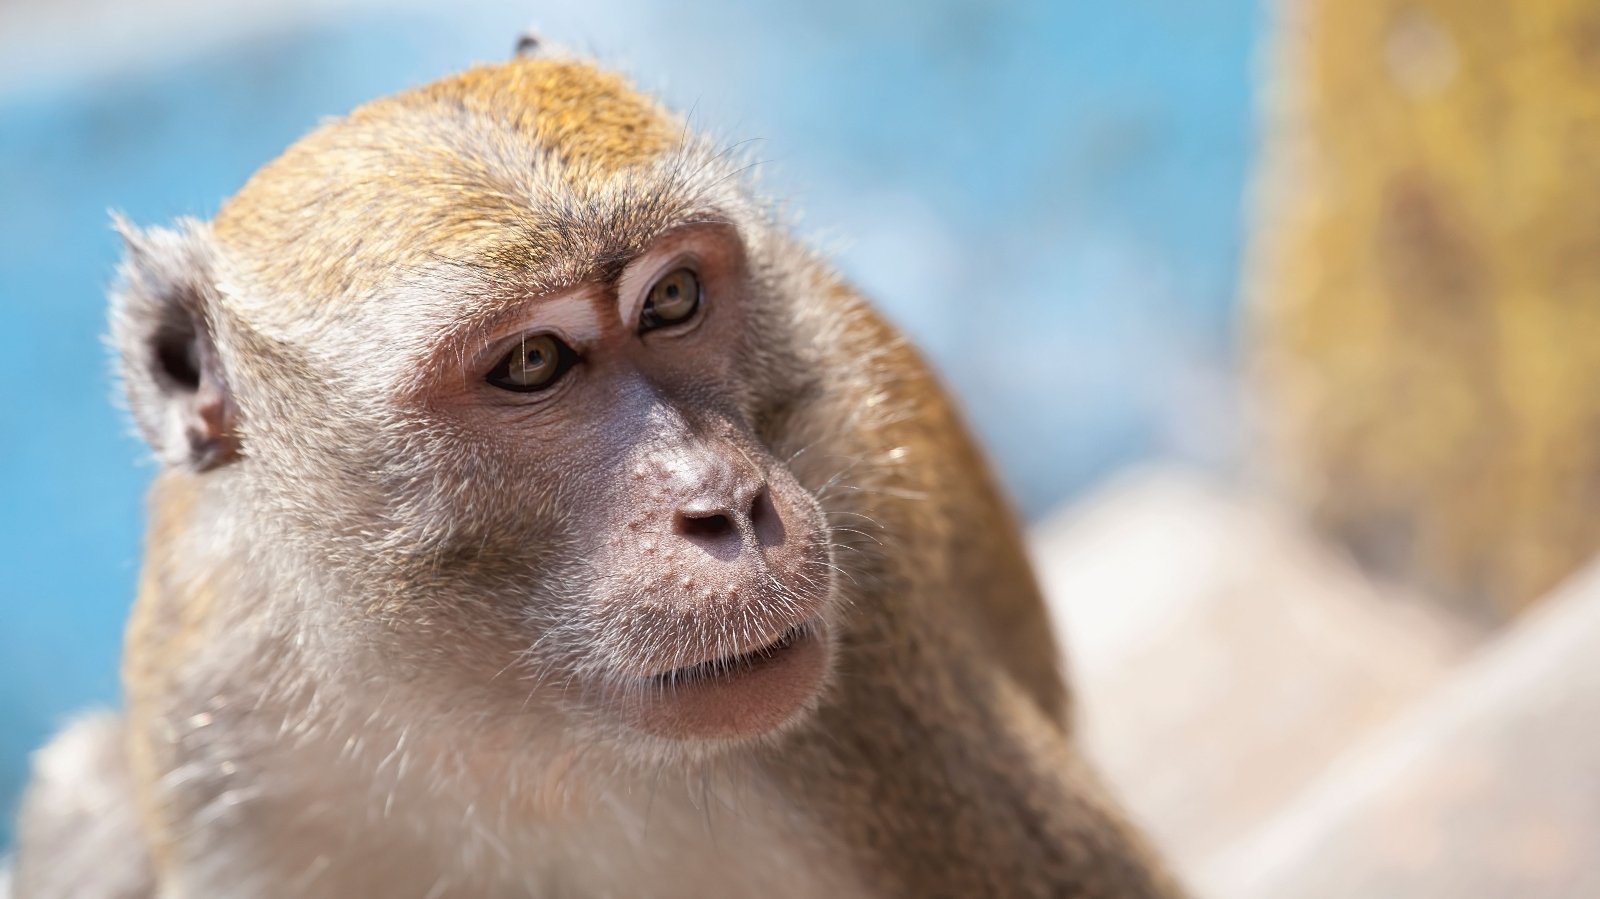 a close up of macaque monkey